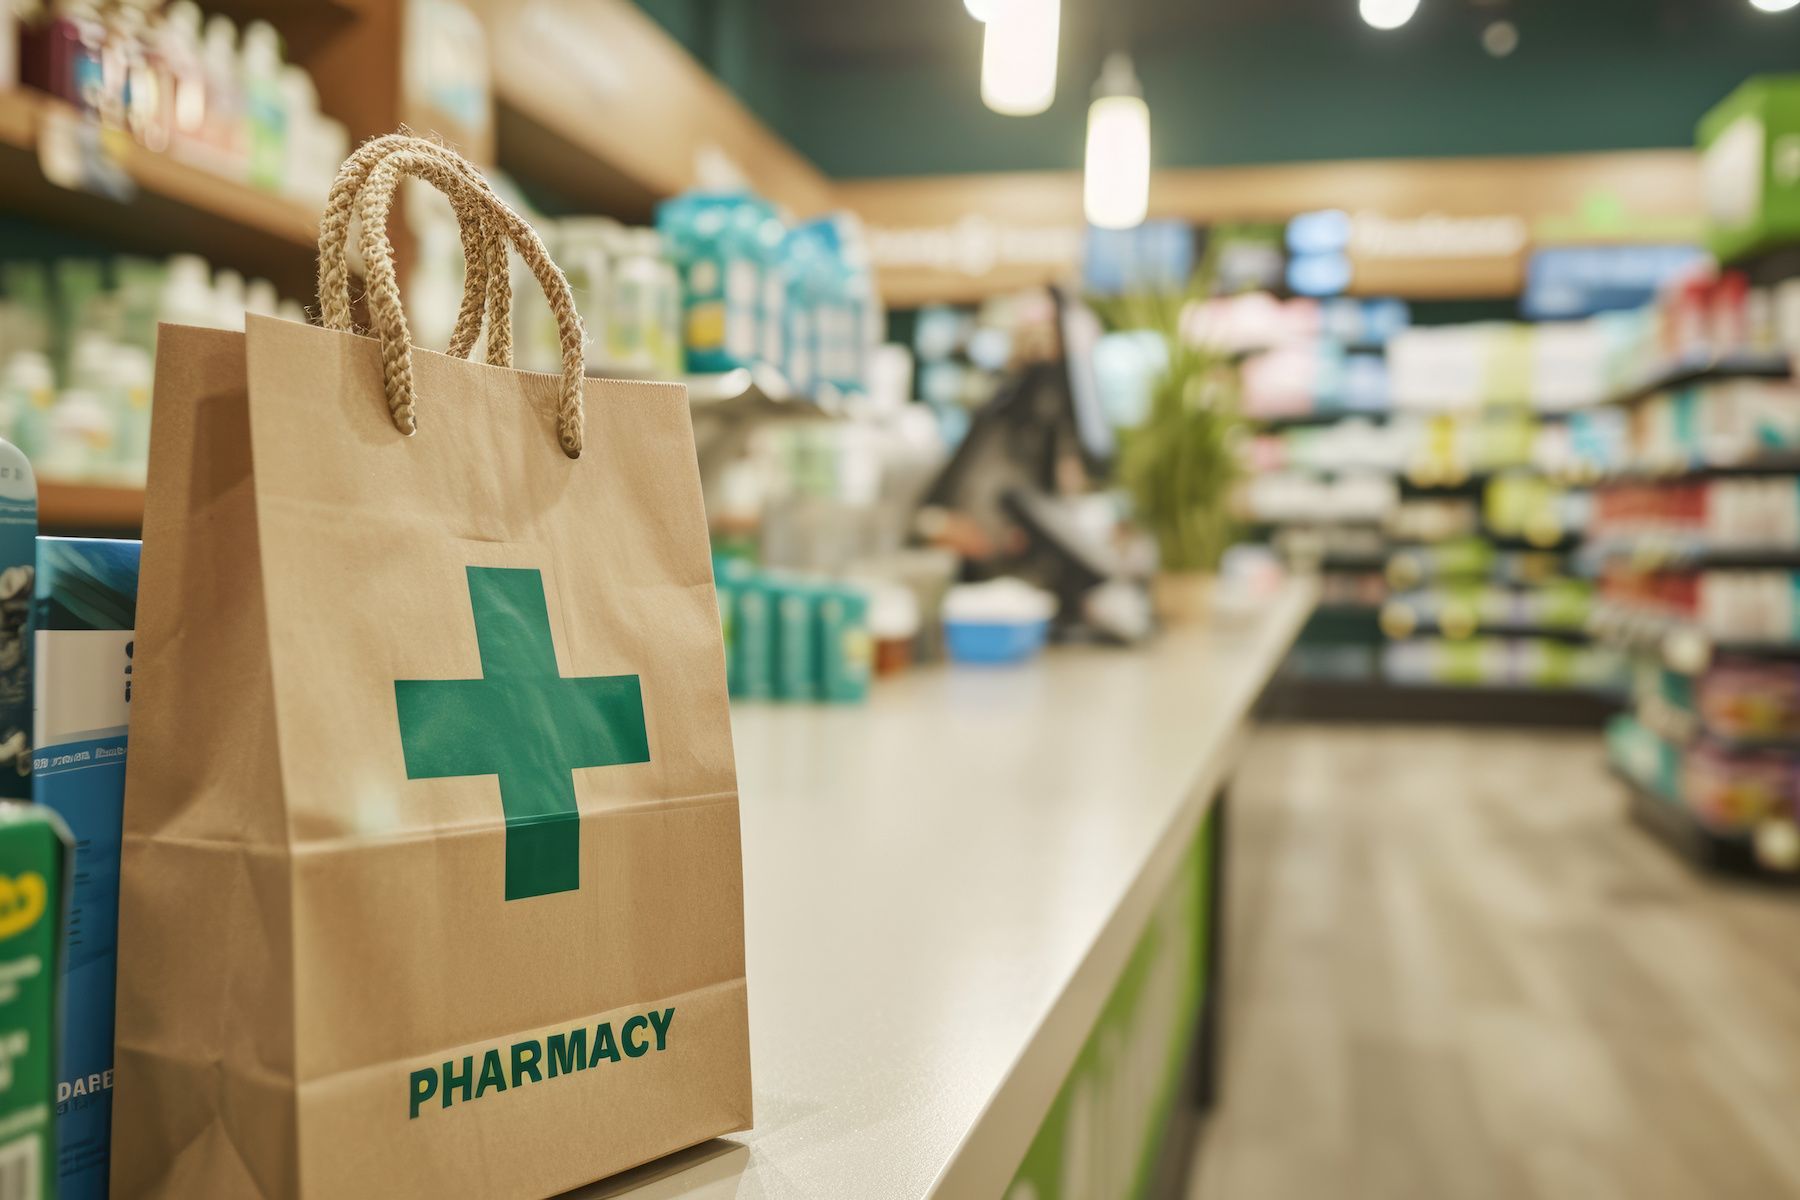 Value-based care models can help pharmacies improve their operations